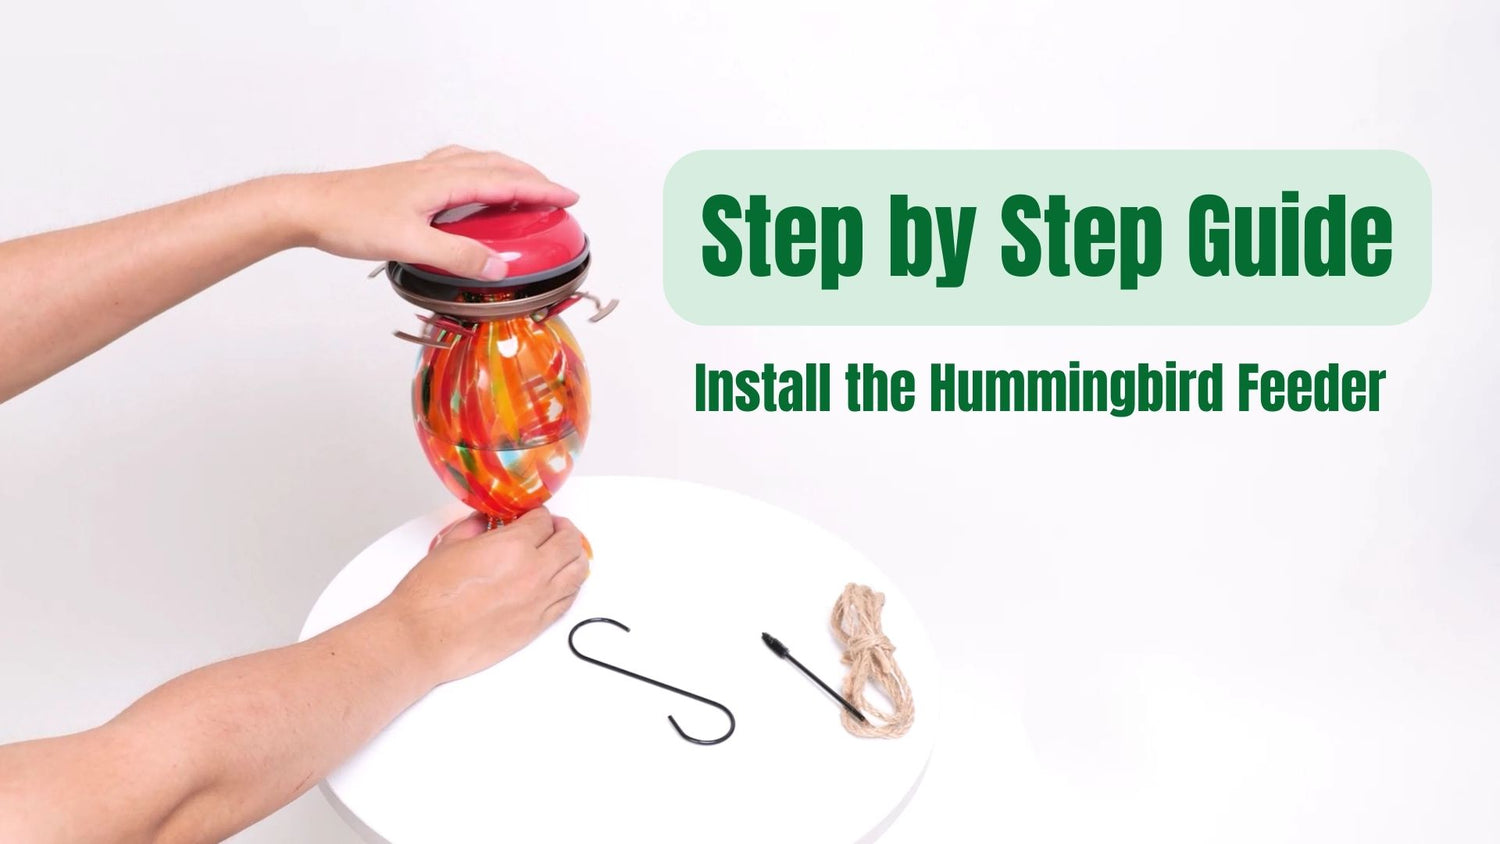 Step-by-step guide on installing the hummingbird feeder